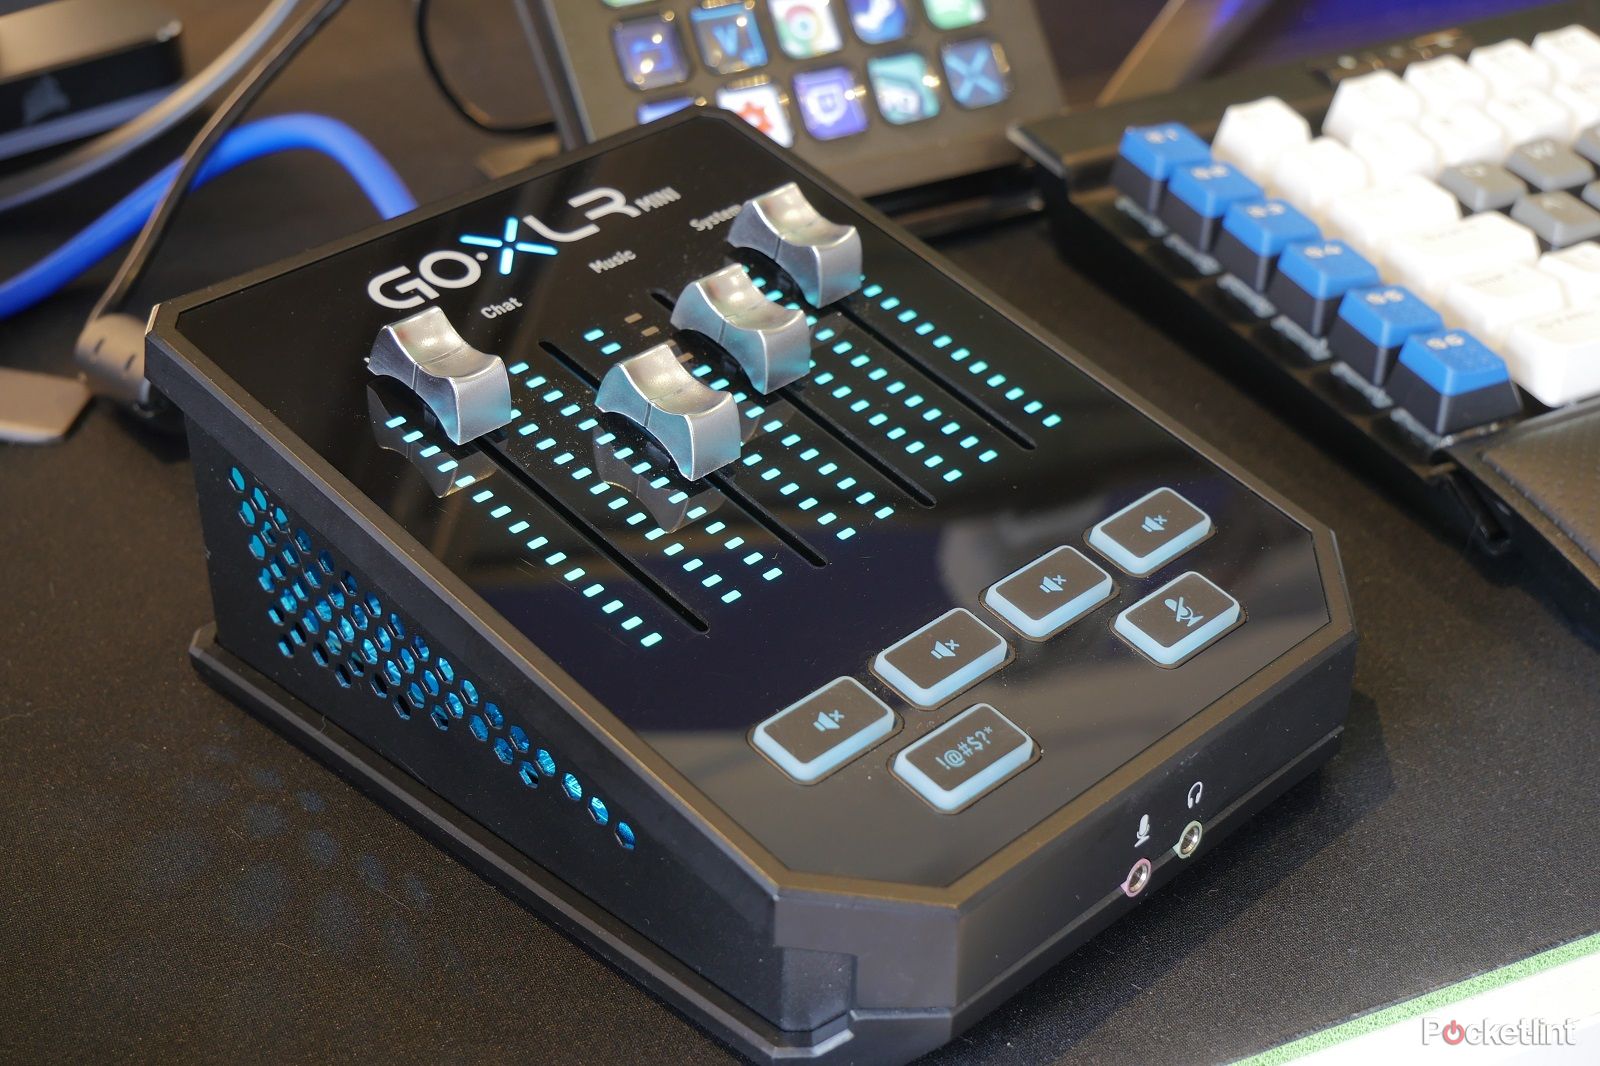 Upgrade your stream production quality with this GoXLR Mini deal